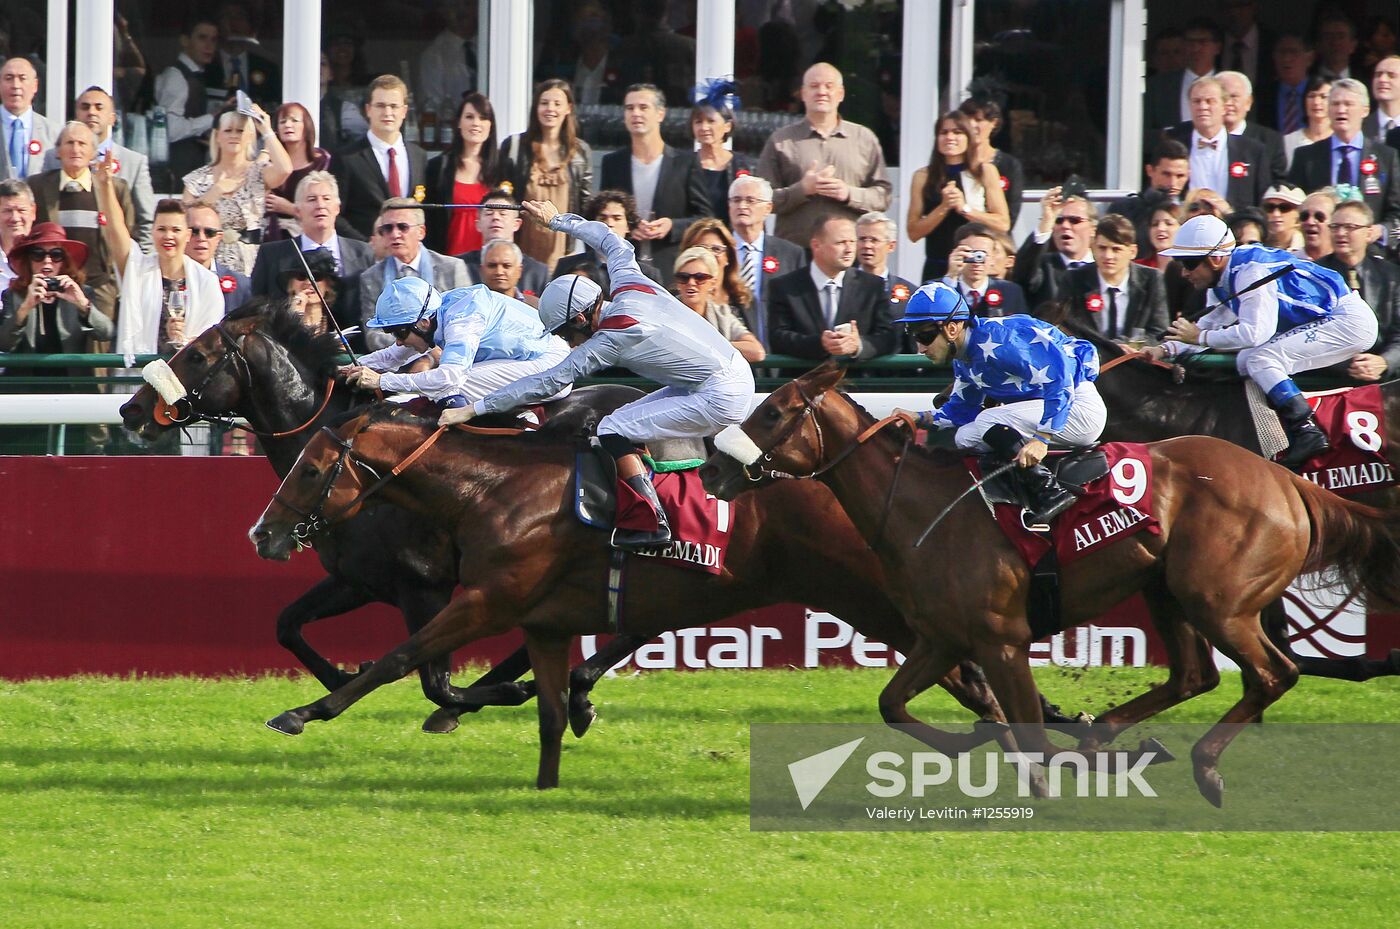 Horse racing for the Arc de Triomphe prize in Paris